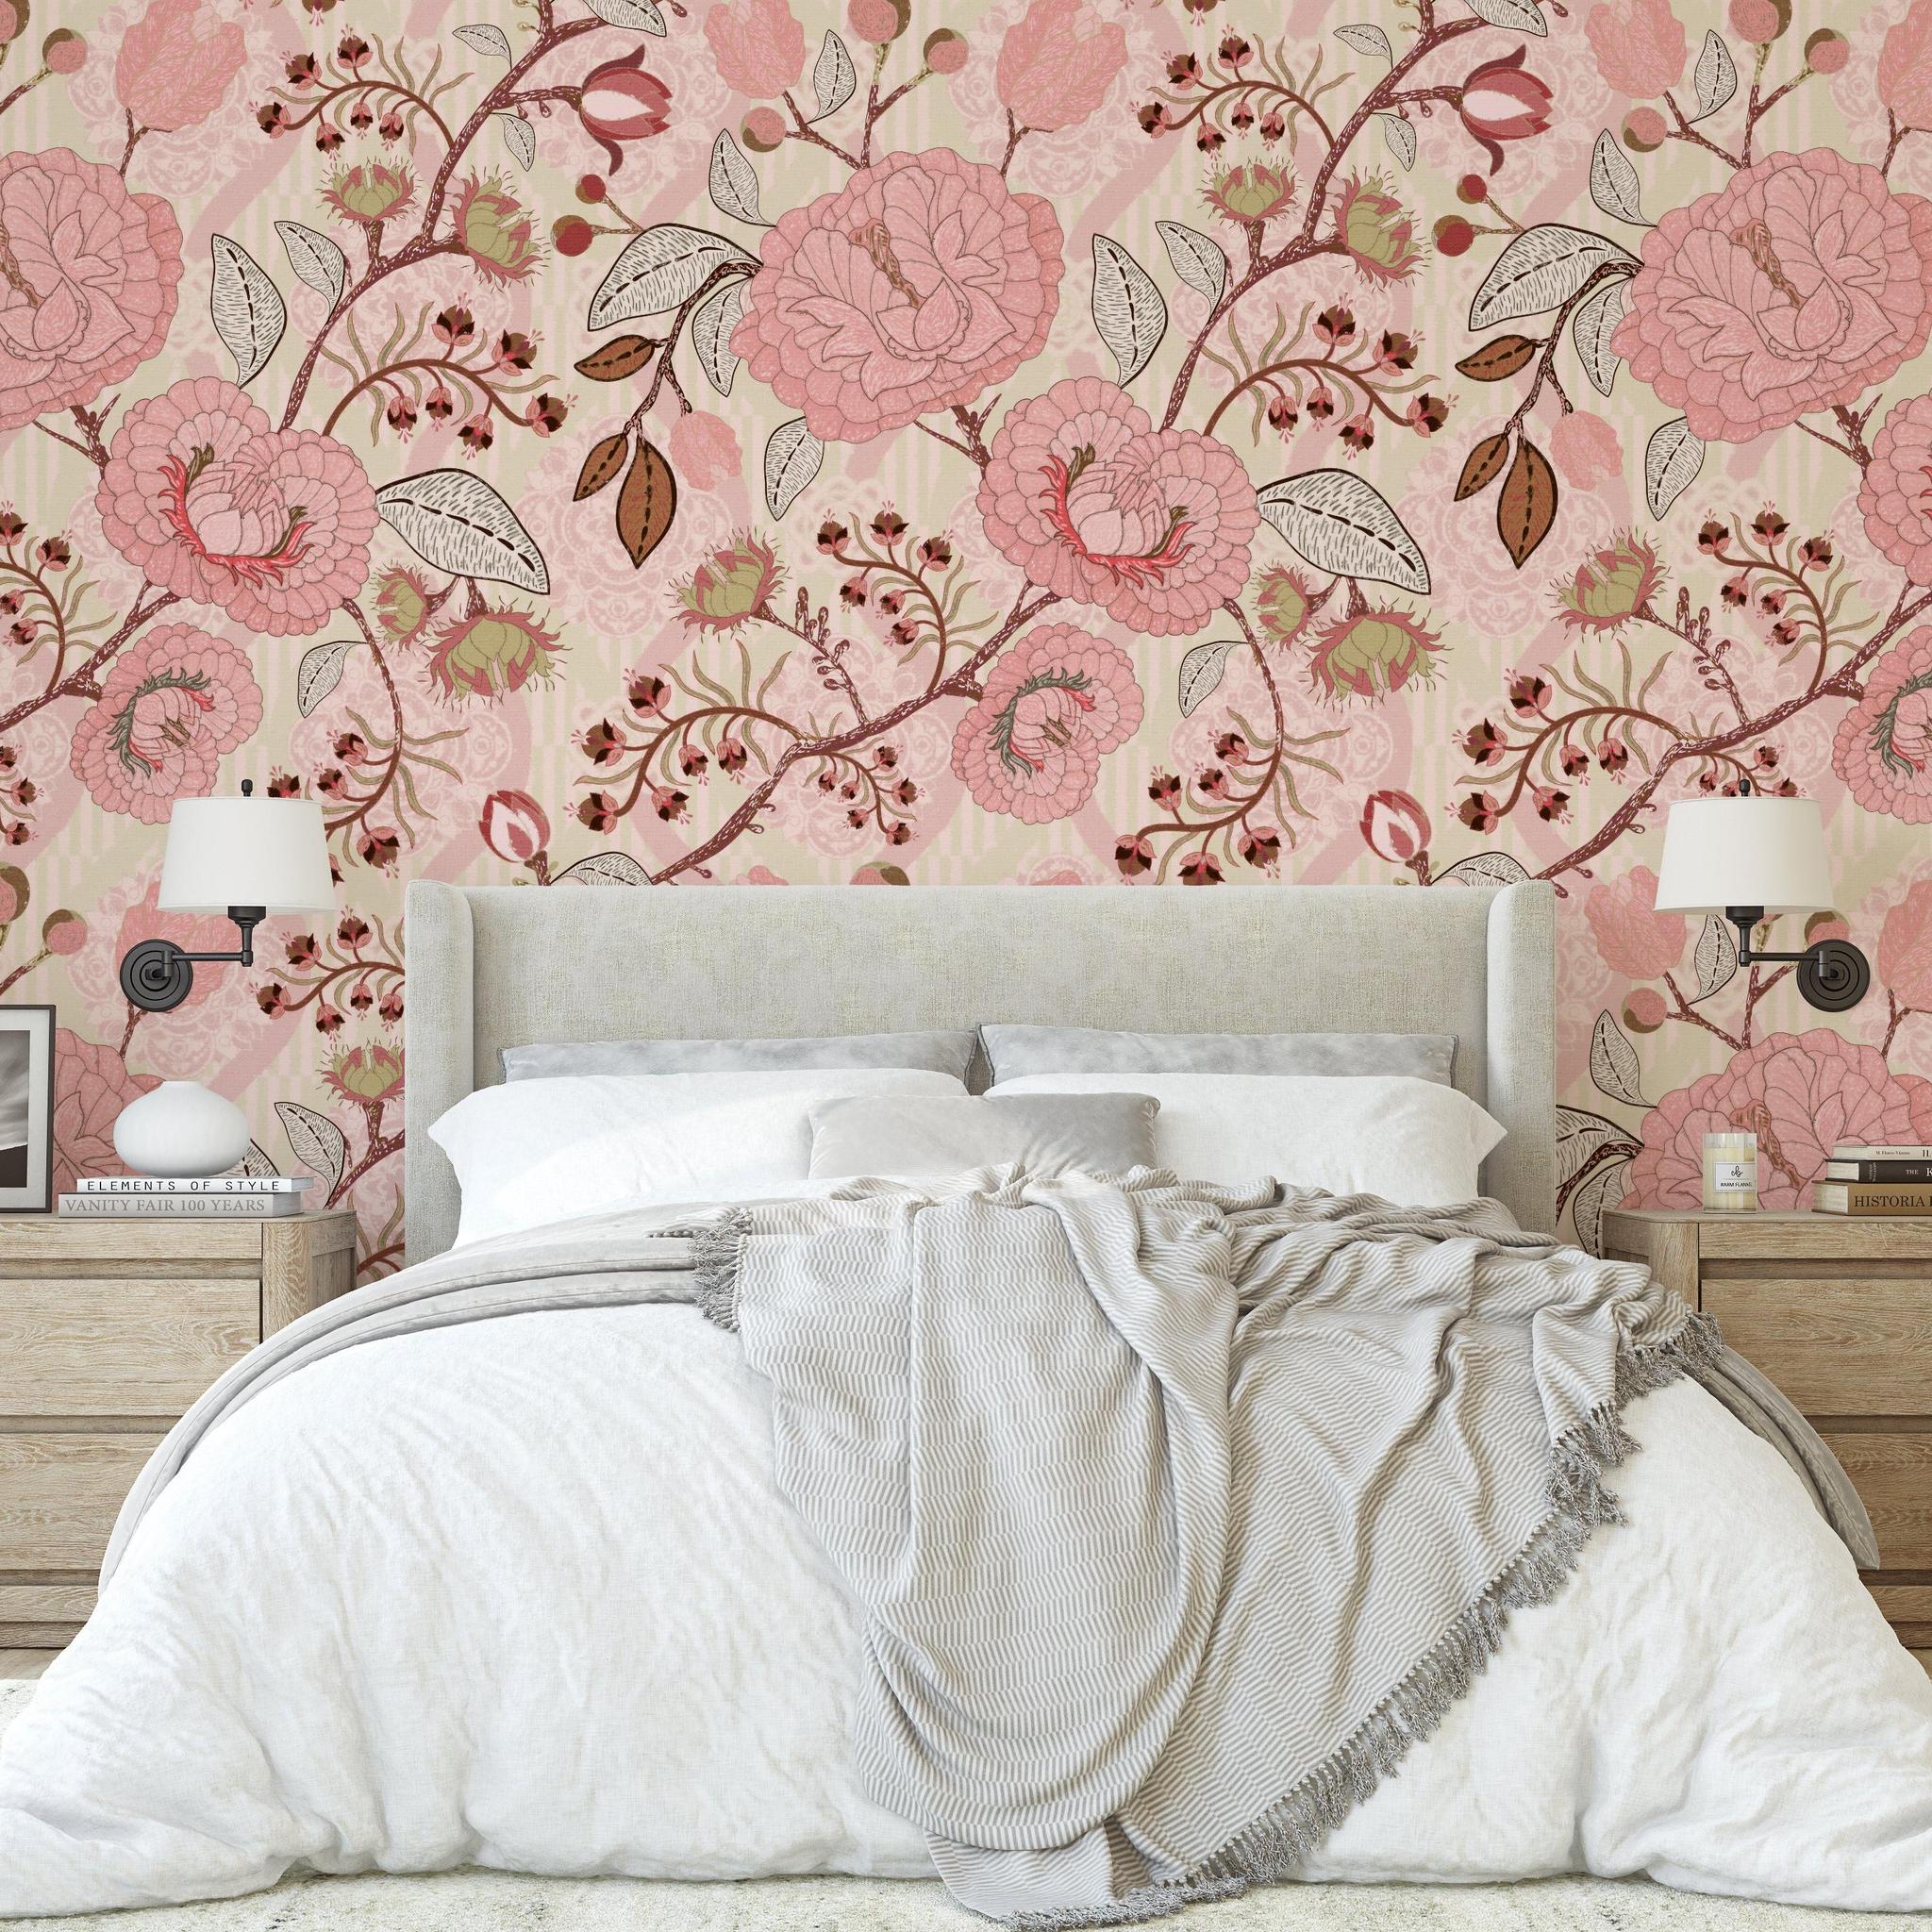 Vivian Wallpaper by Wall Blush SG02 in cozy bedroom with floral pattern focus
